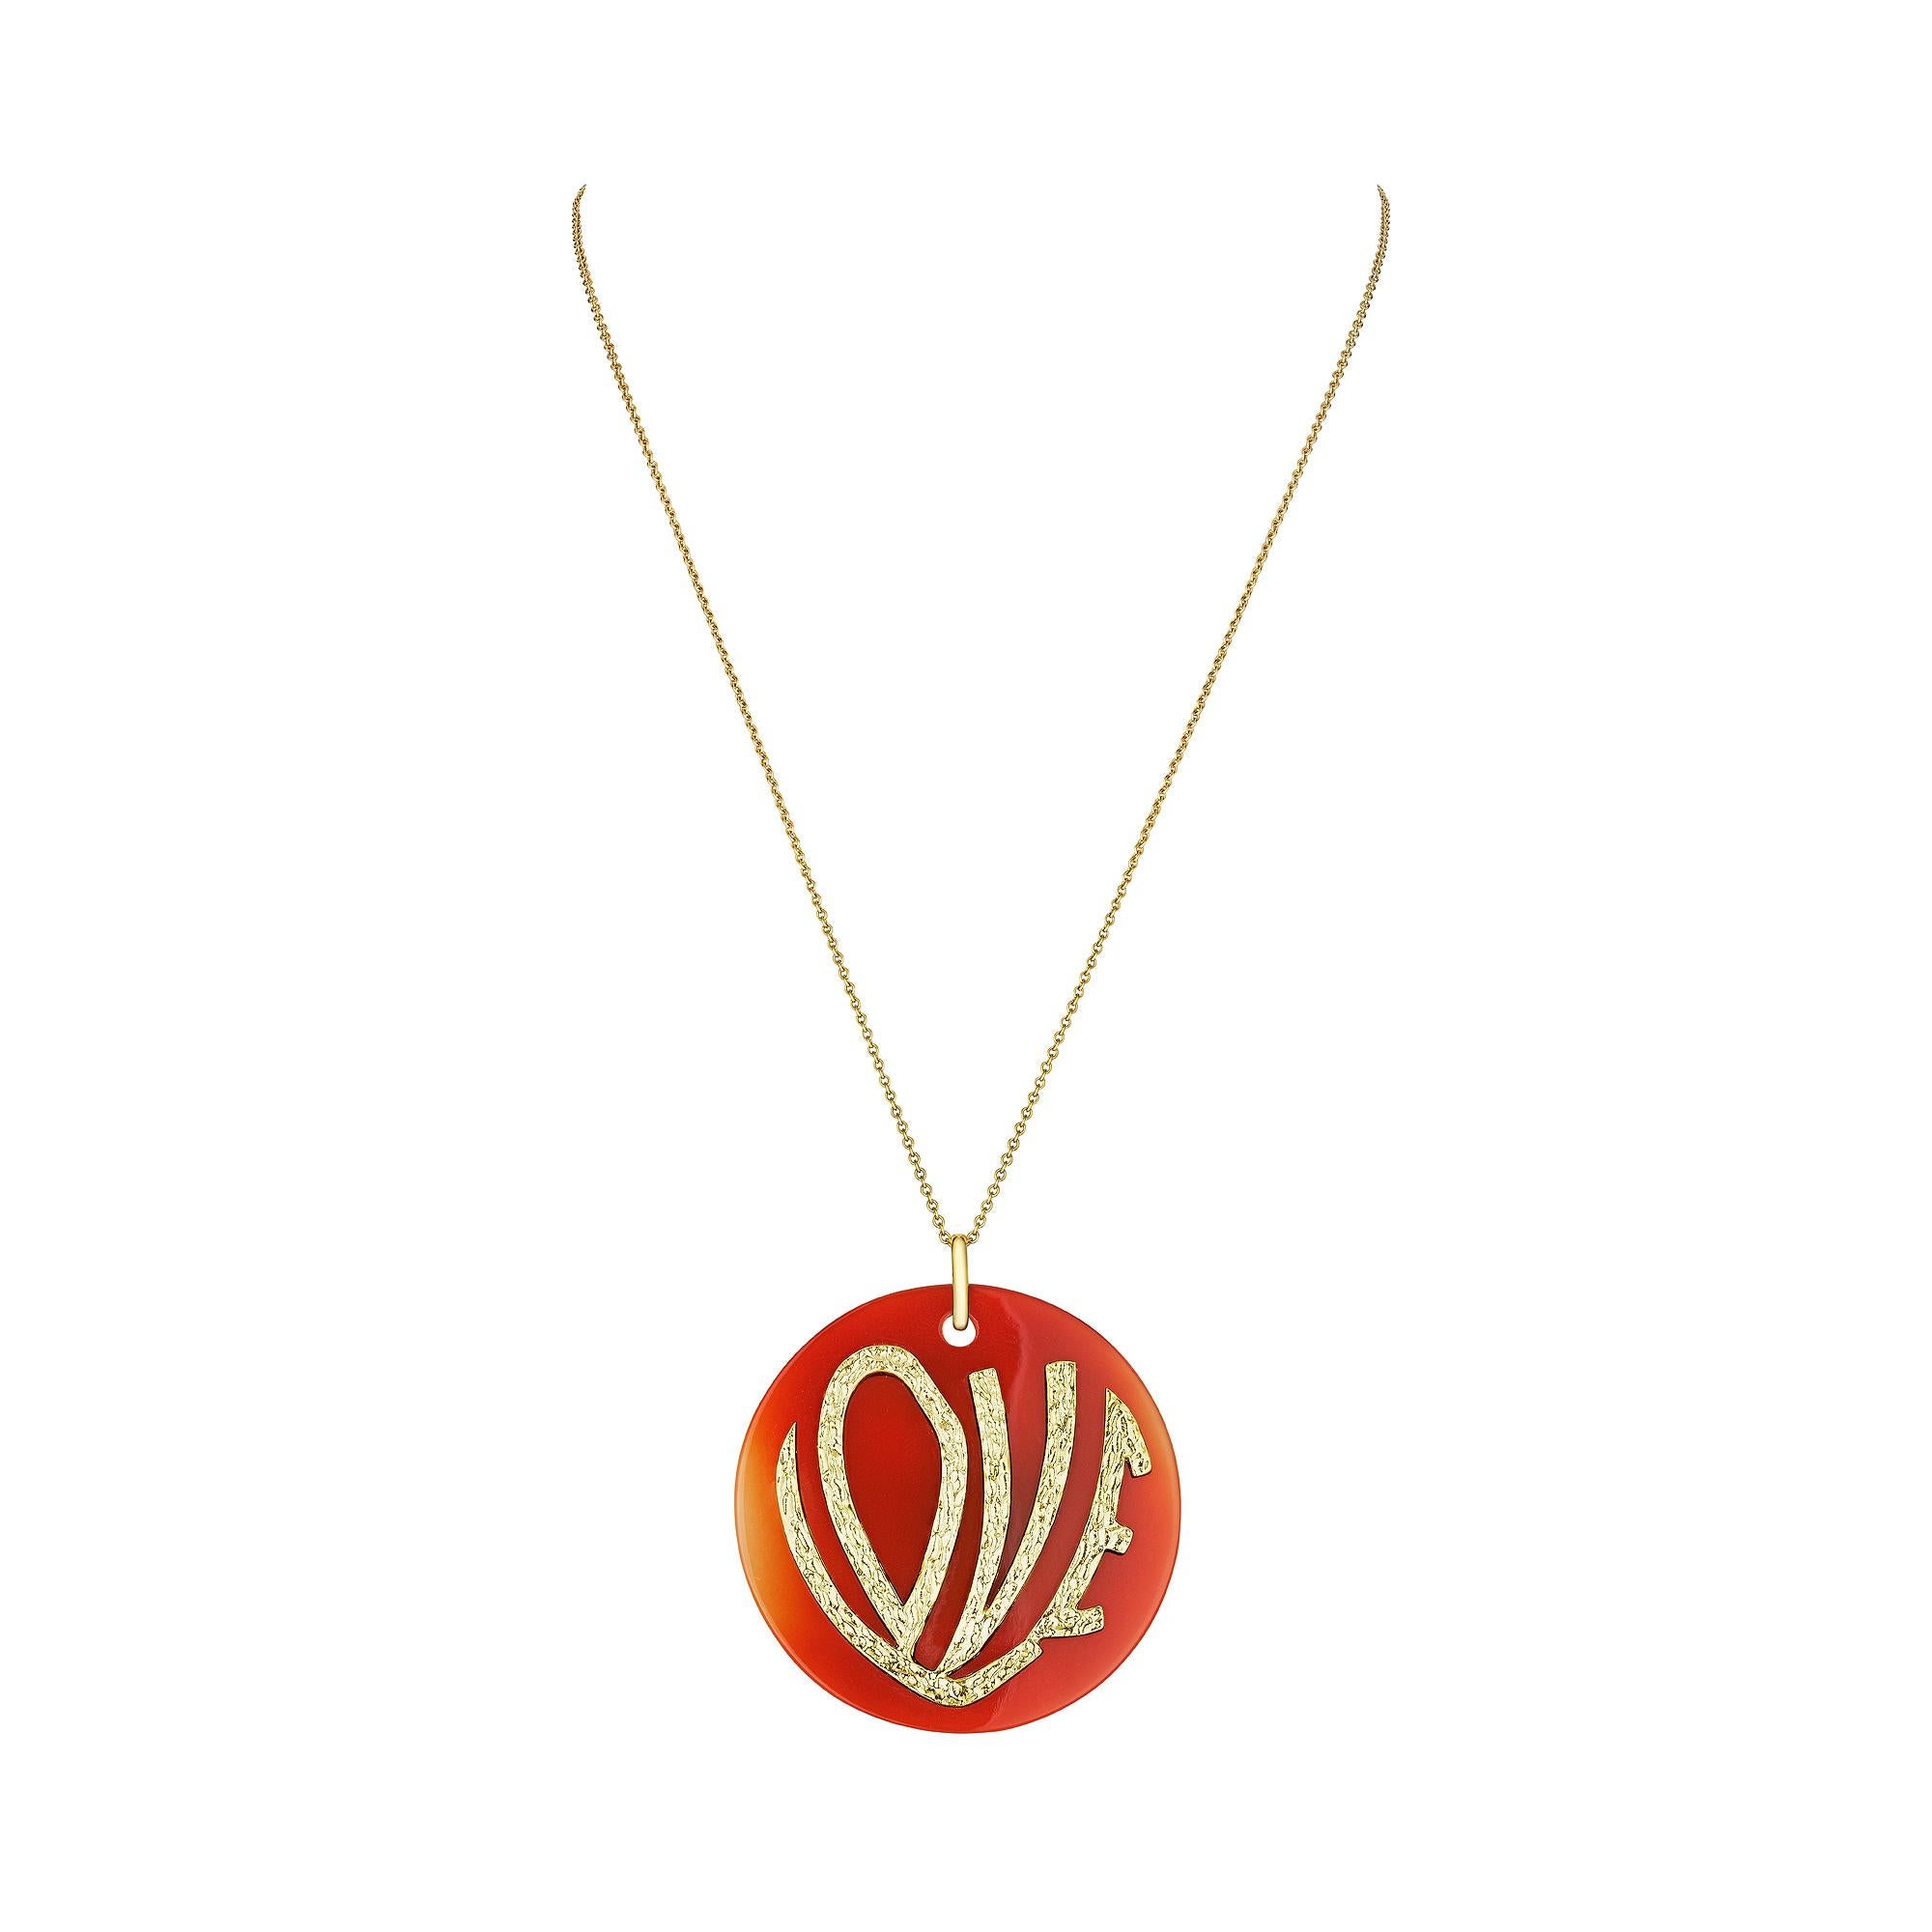 Show your love in full sight with this 1970's inspired large carnelian love pendant necklace.  This bold and colorful carnelian disc, with the hammered 18 karat yellow gold word LOVE stylishly applied to the front, makes this necklace a powerful and